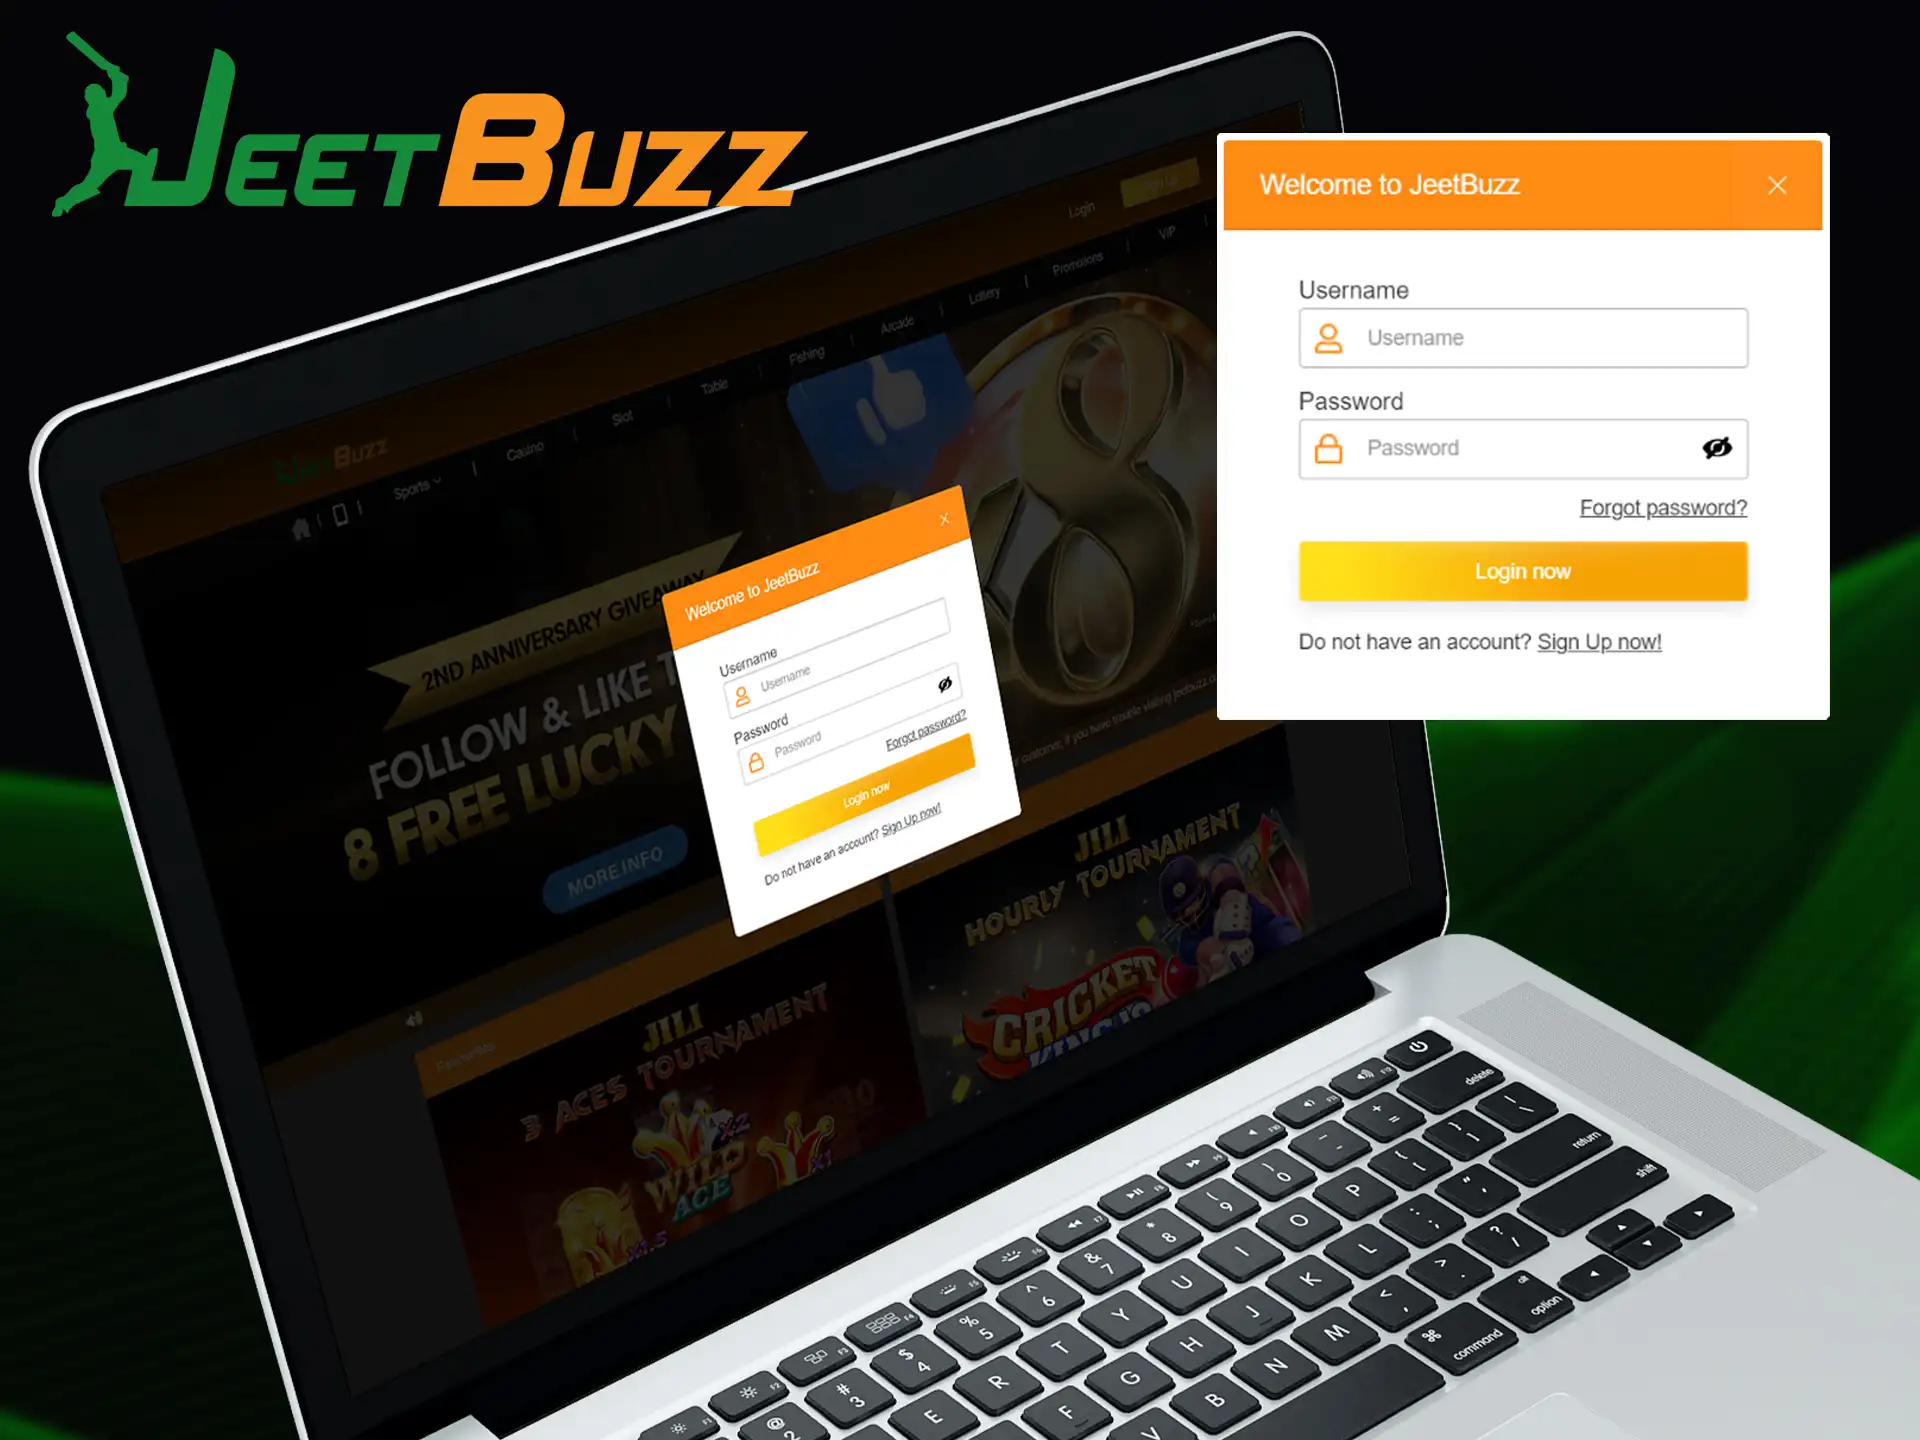 Confirm your account at JeetBuzz.